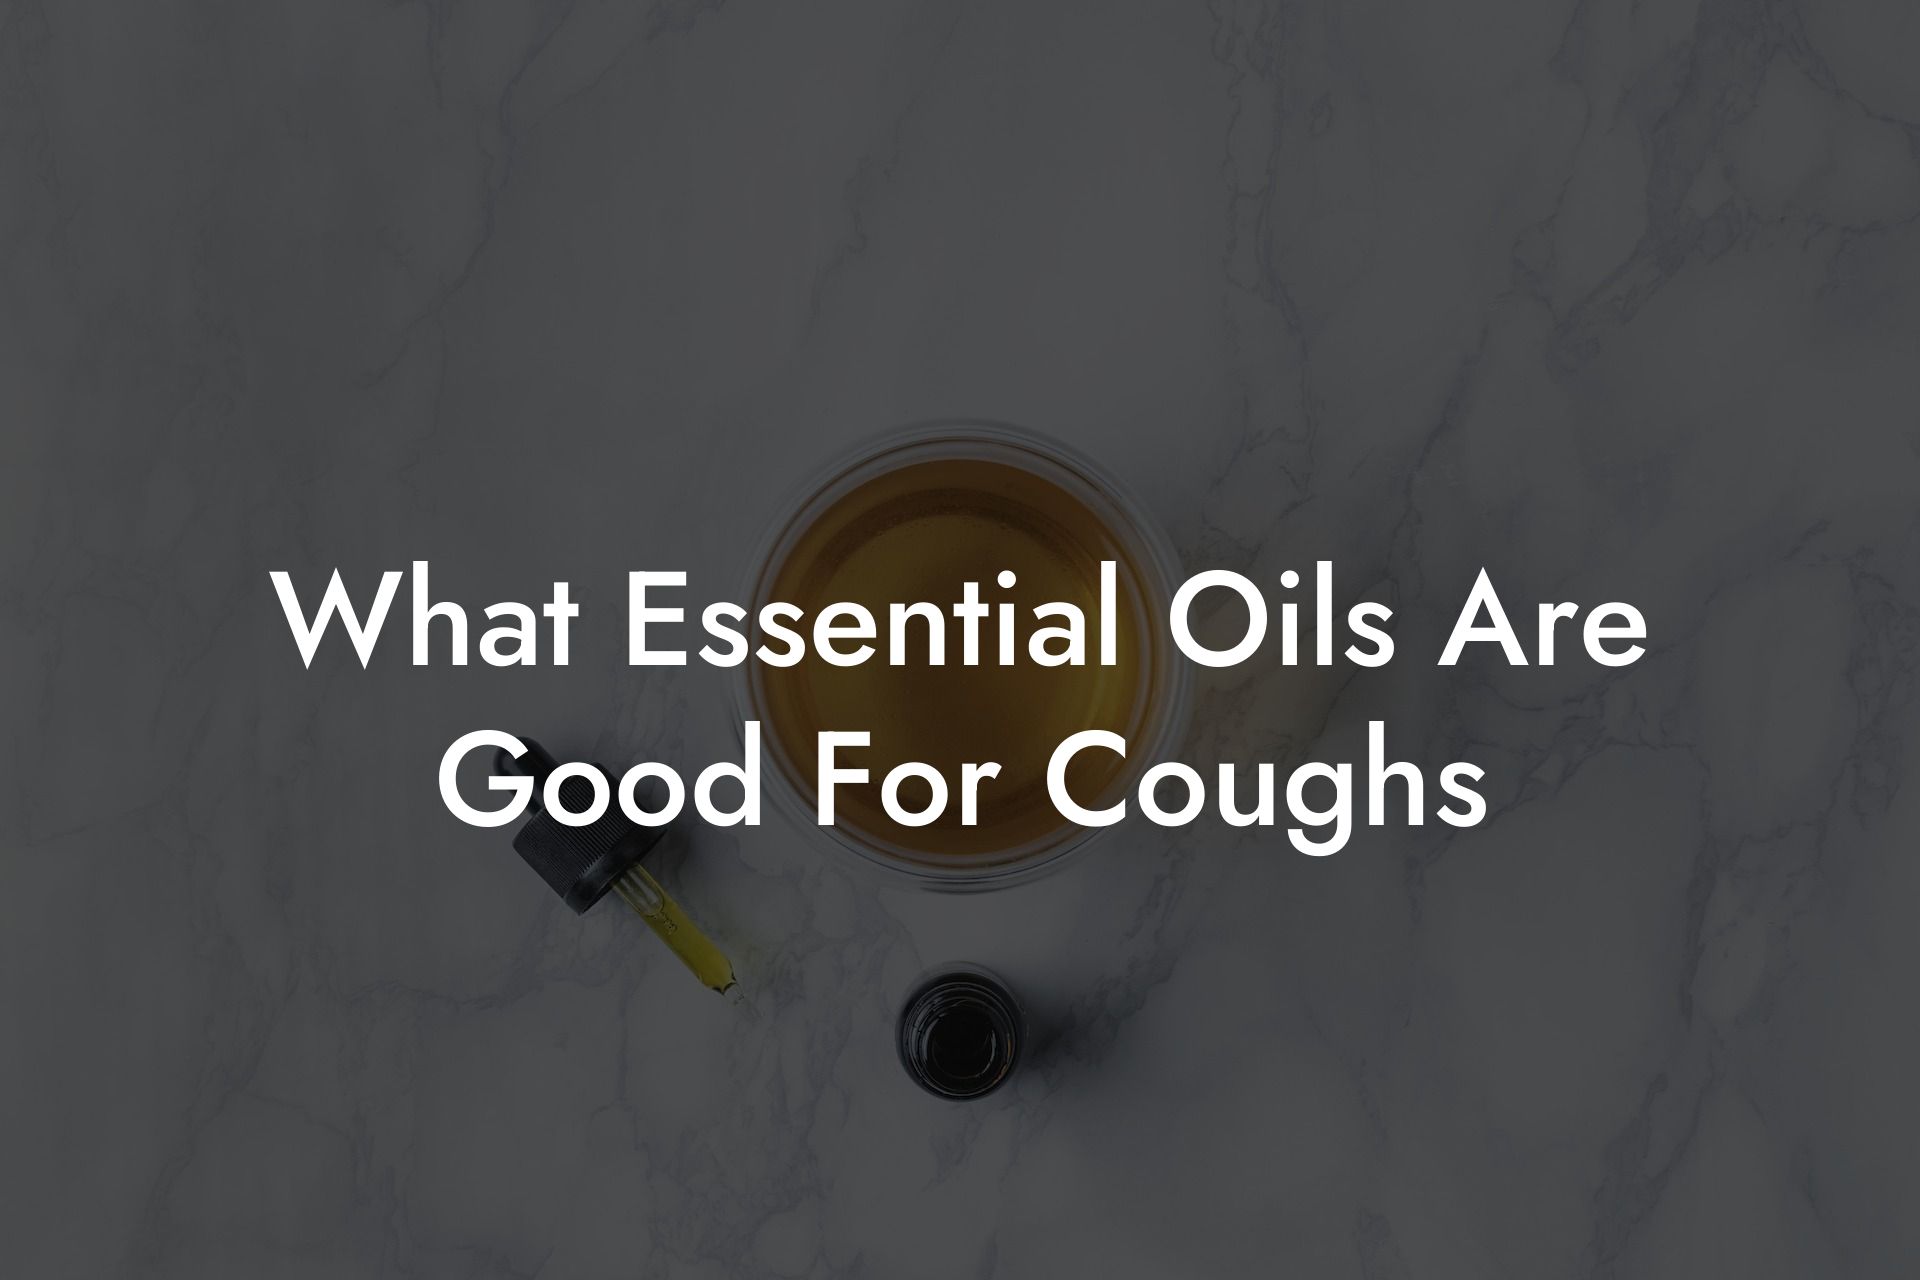 What Essential Oils Are Good For Coughs